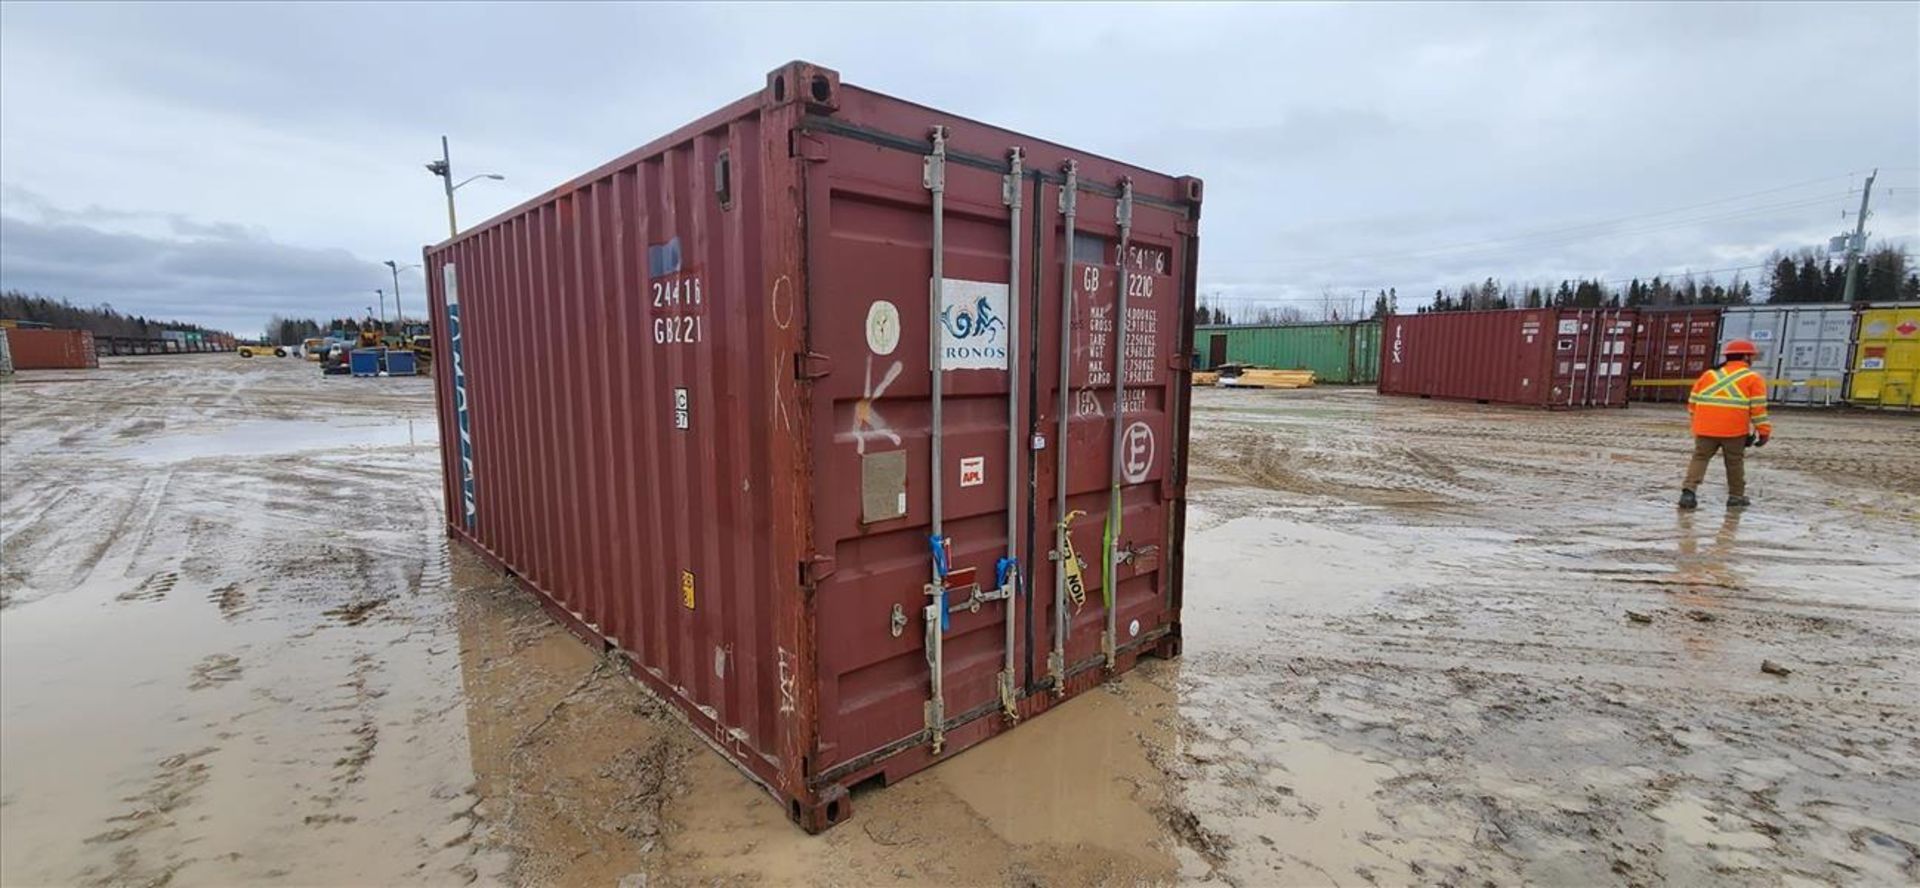 sea container, 20 ft. c/w contents: white well pebbles (Asset Location: Hallnor Yard) {Day 1} [TAG - Image 3 of 4